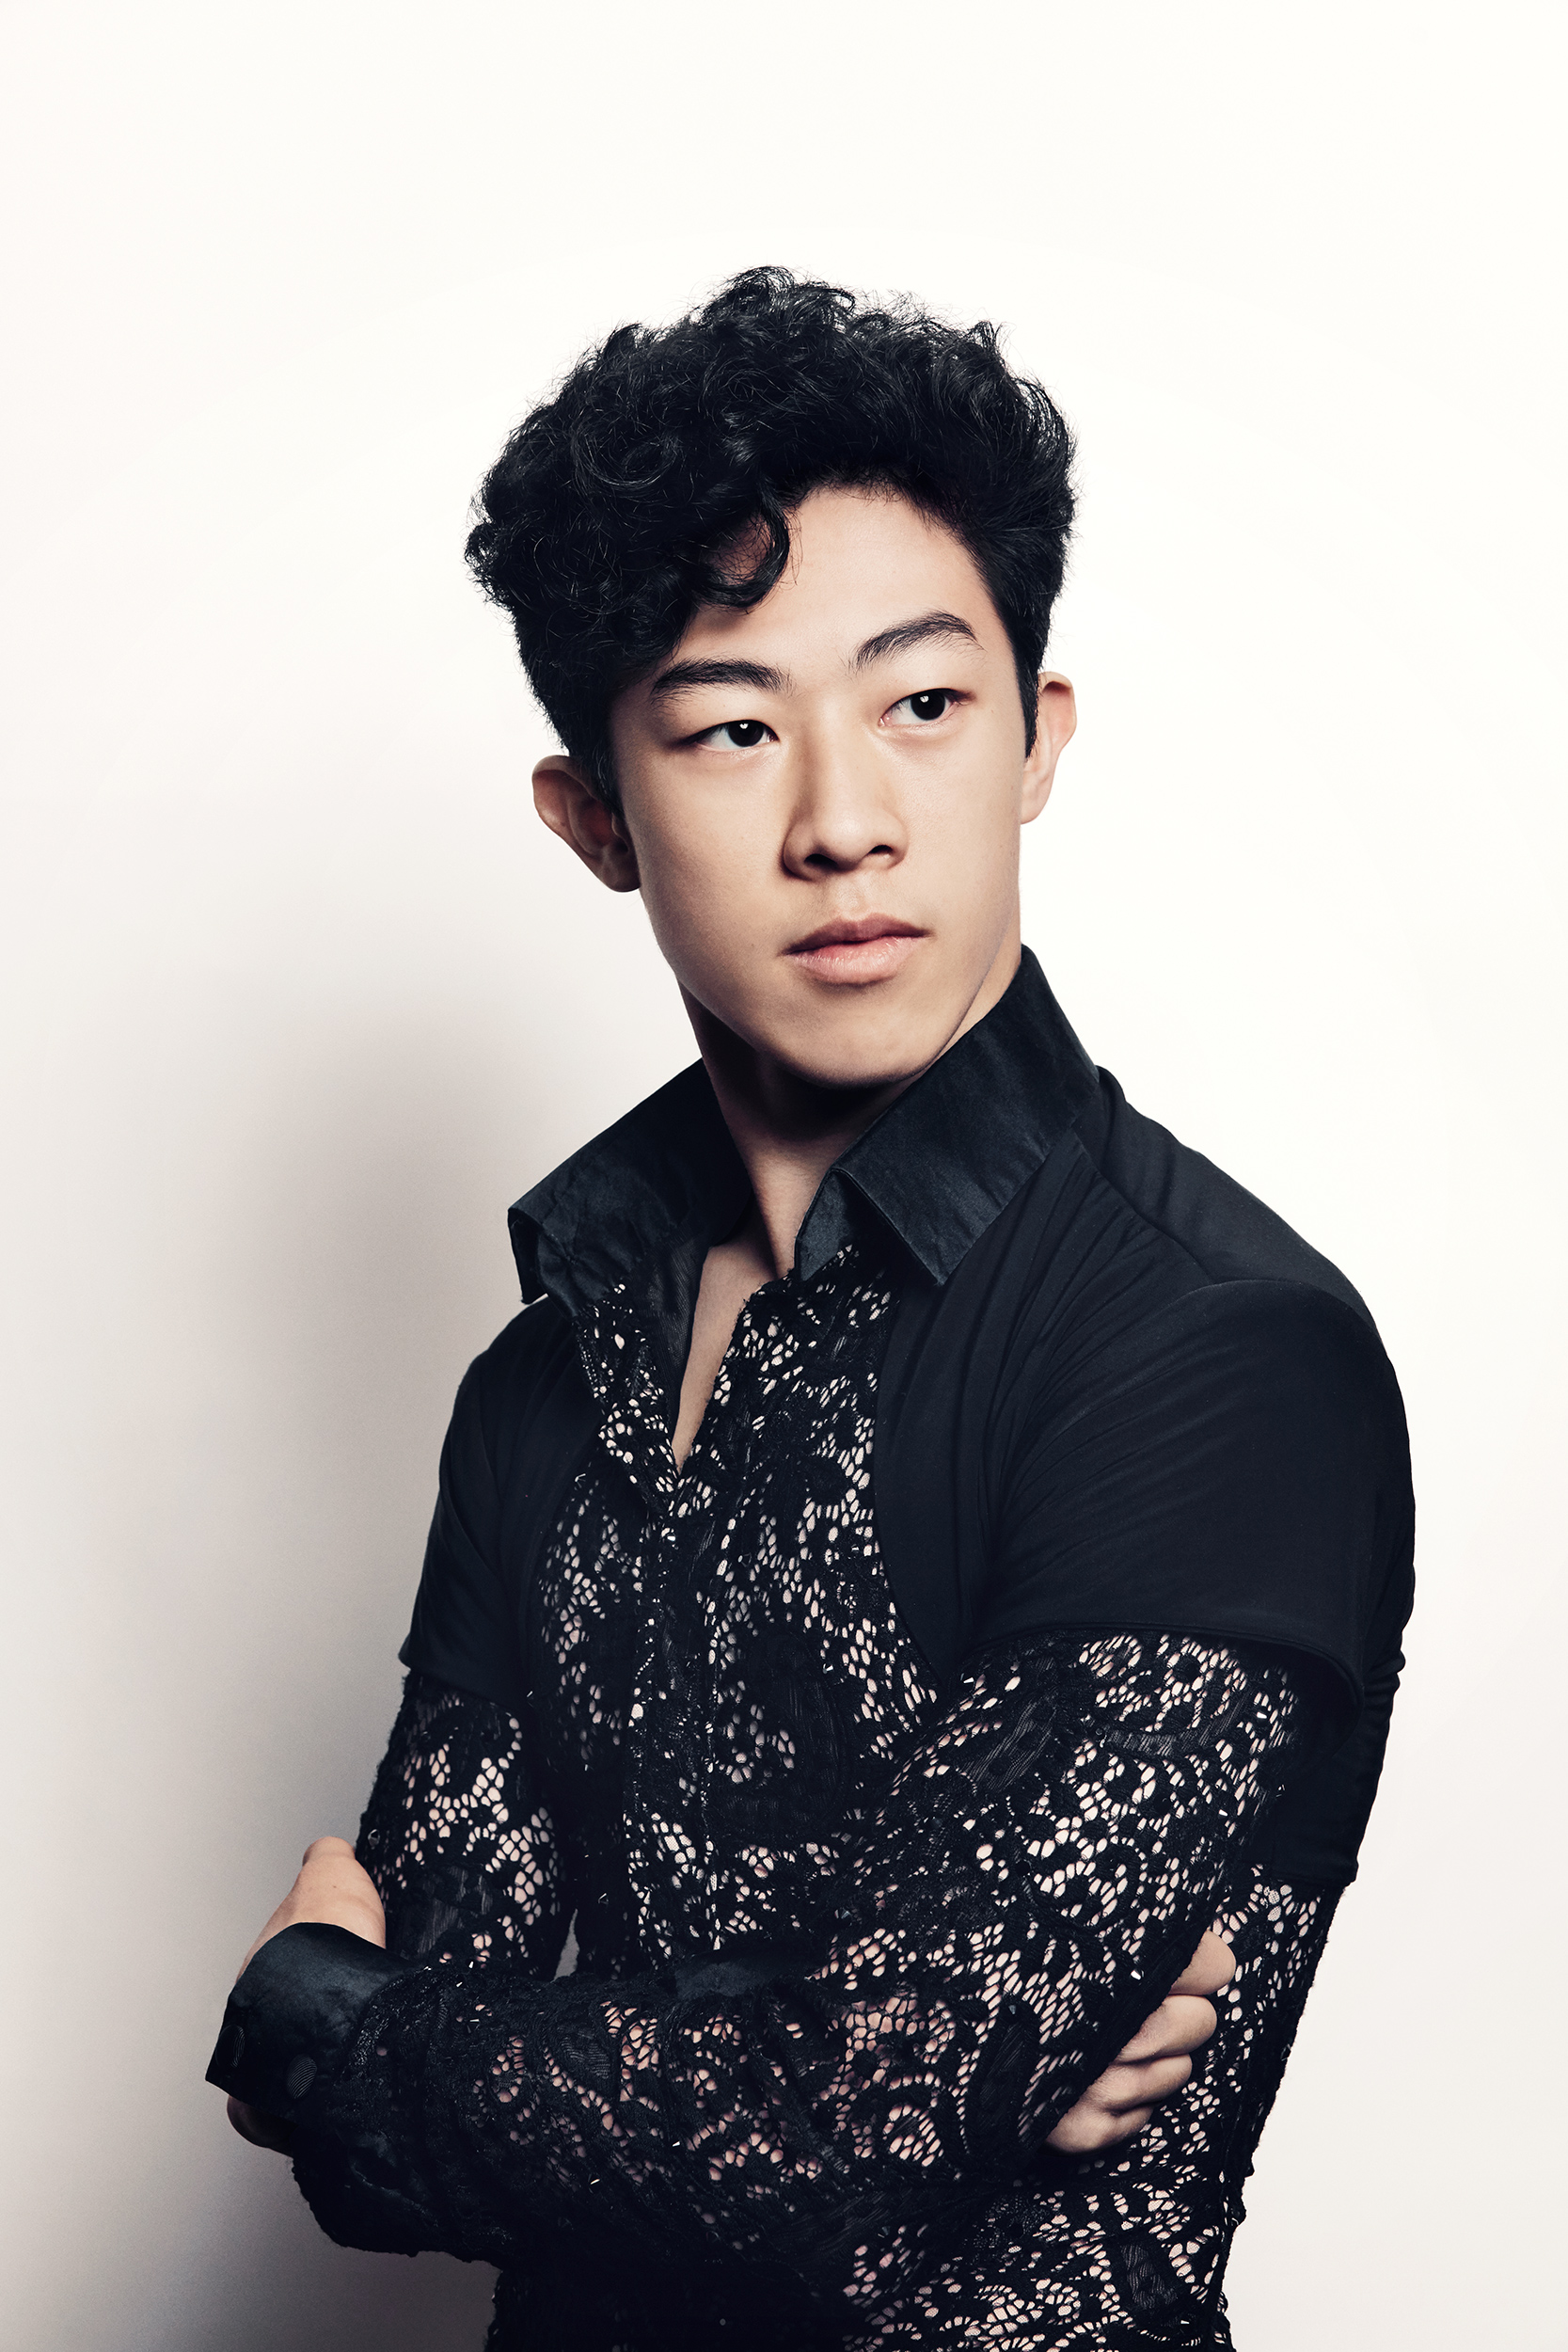 Nathan Chen photographed in Los Angeles on Feb. 3, 2017.